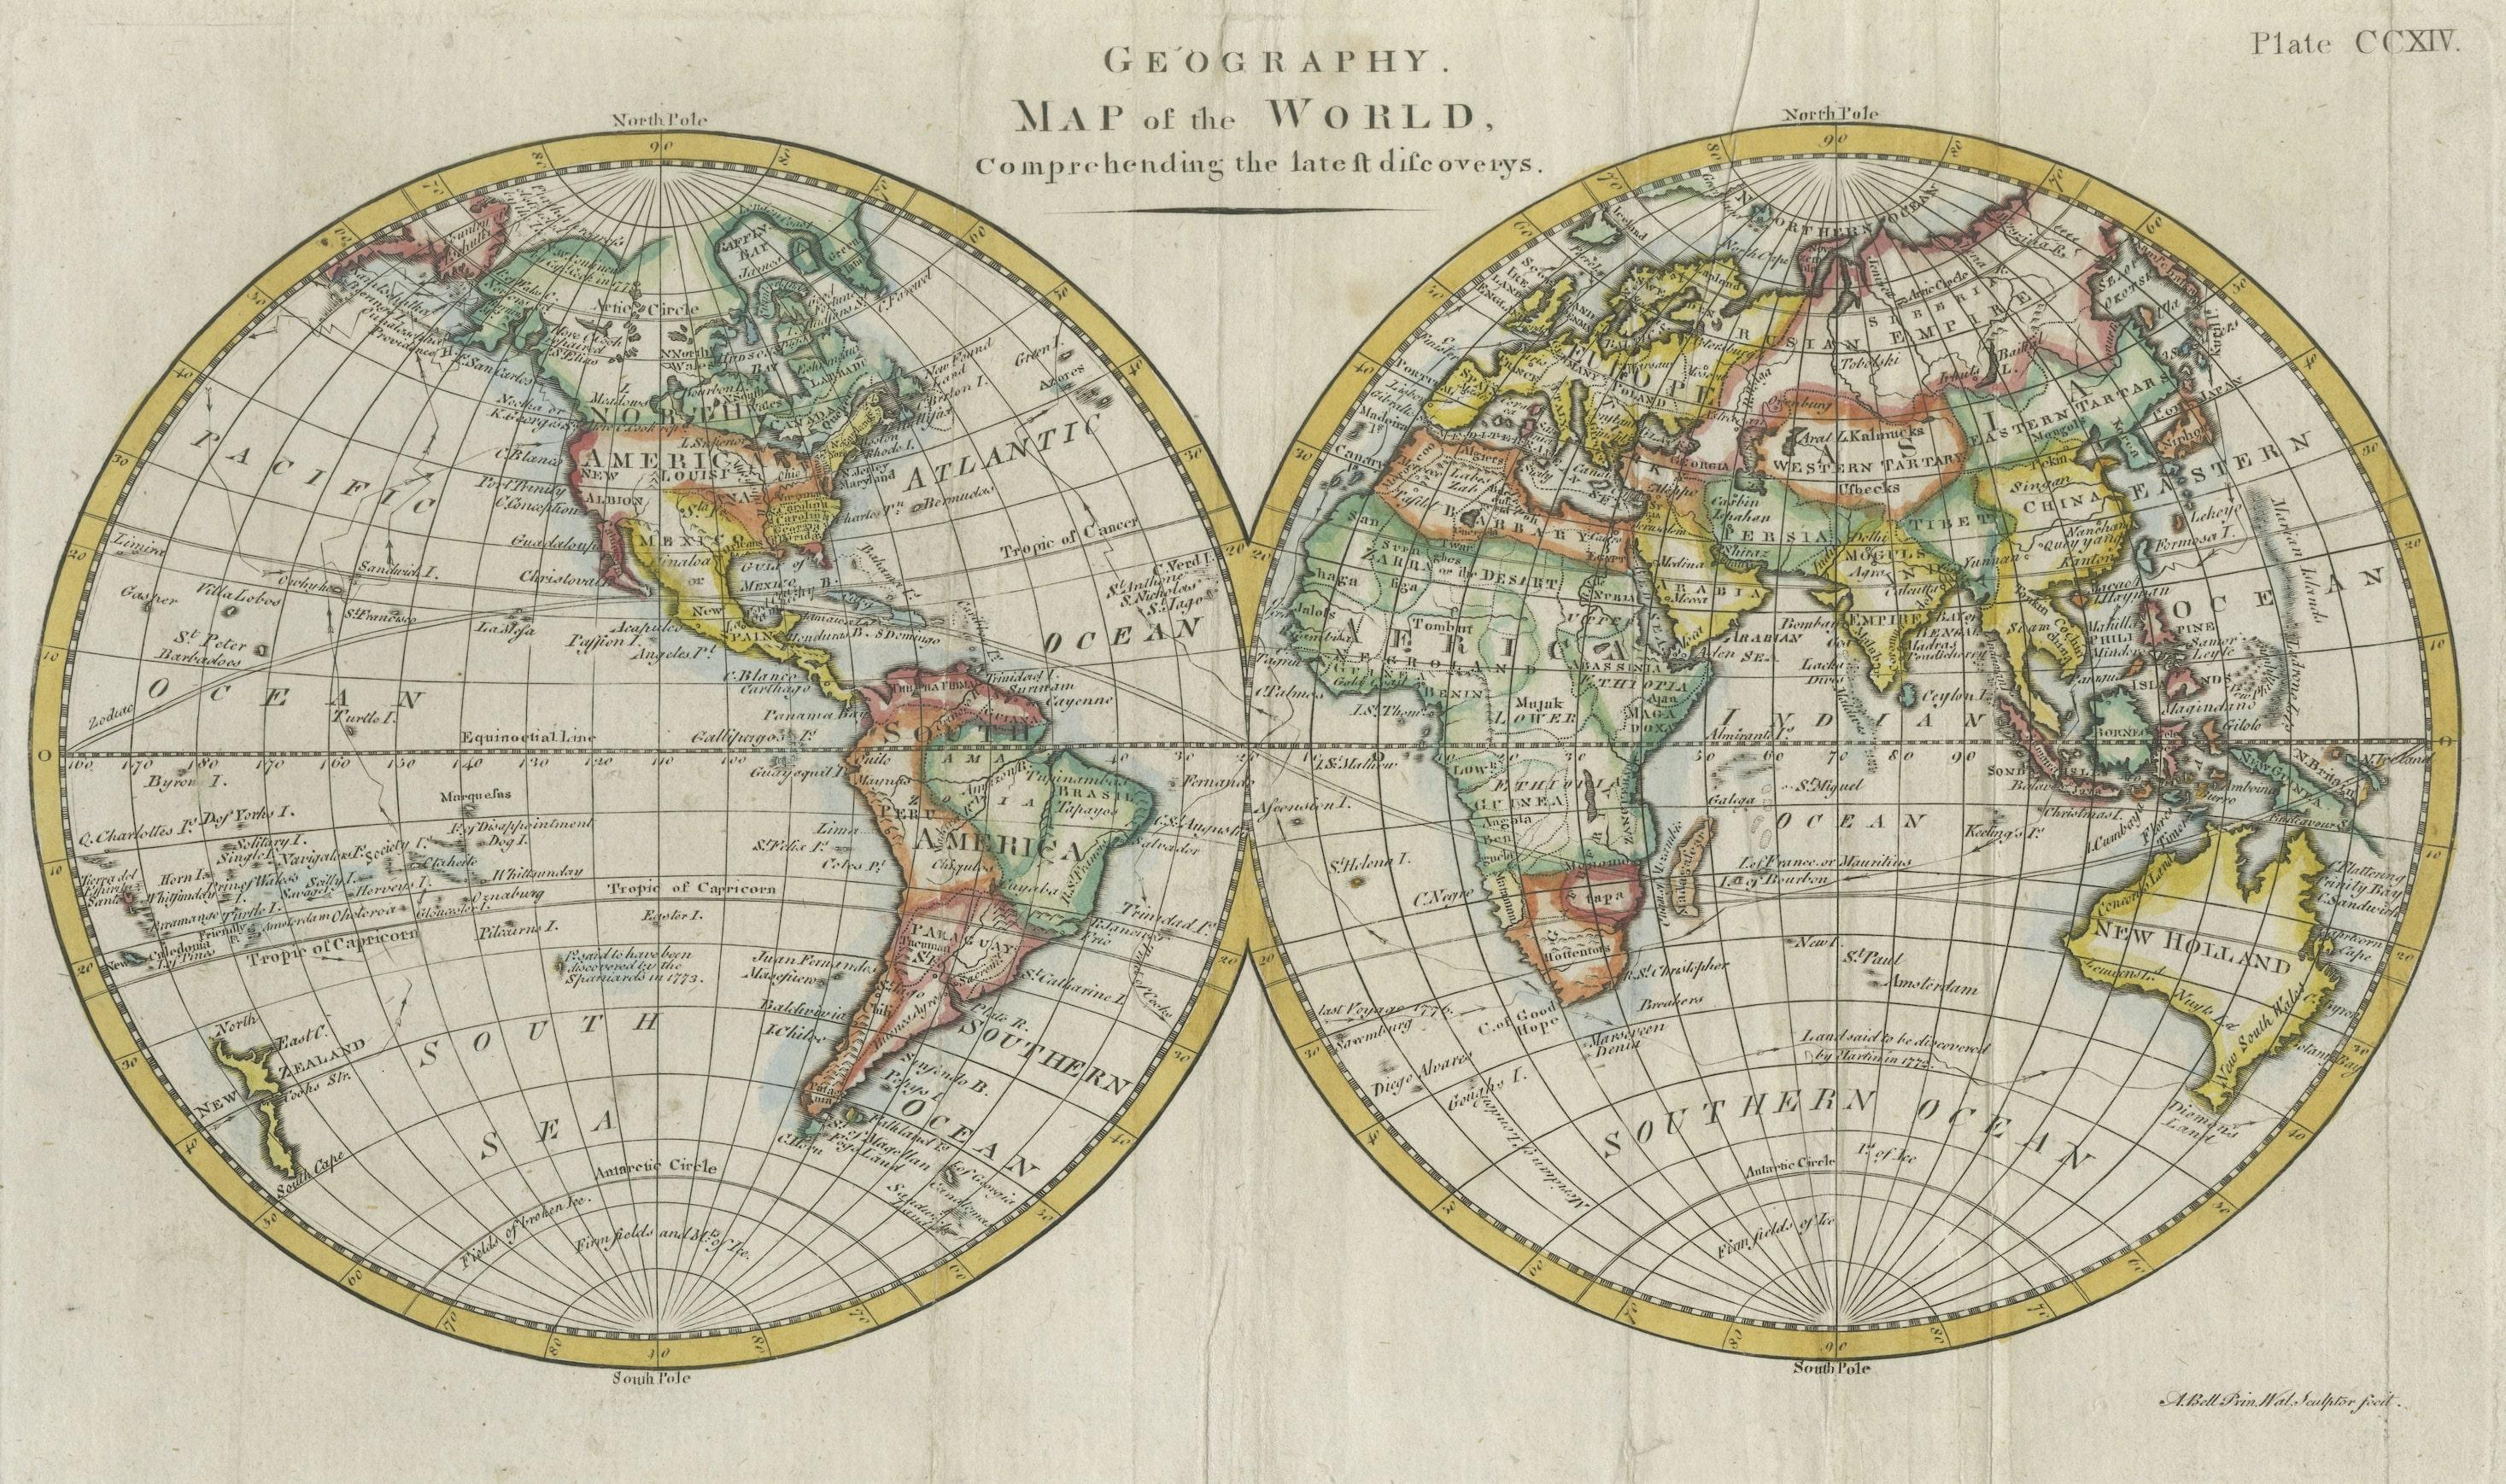 Antique world map titled 'A Map of the World from the best Authorities'. Detailed map of the World, showing tracks of Captain James Cook in his 3 voyages in great detail. The map is extensively annotated with information on the explorations of a